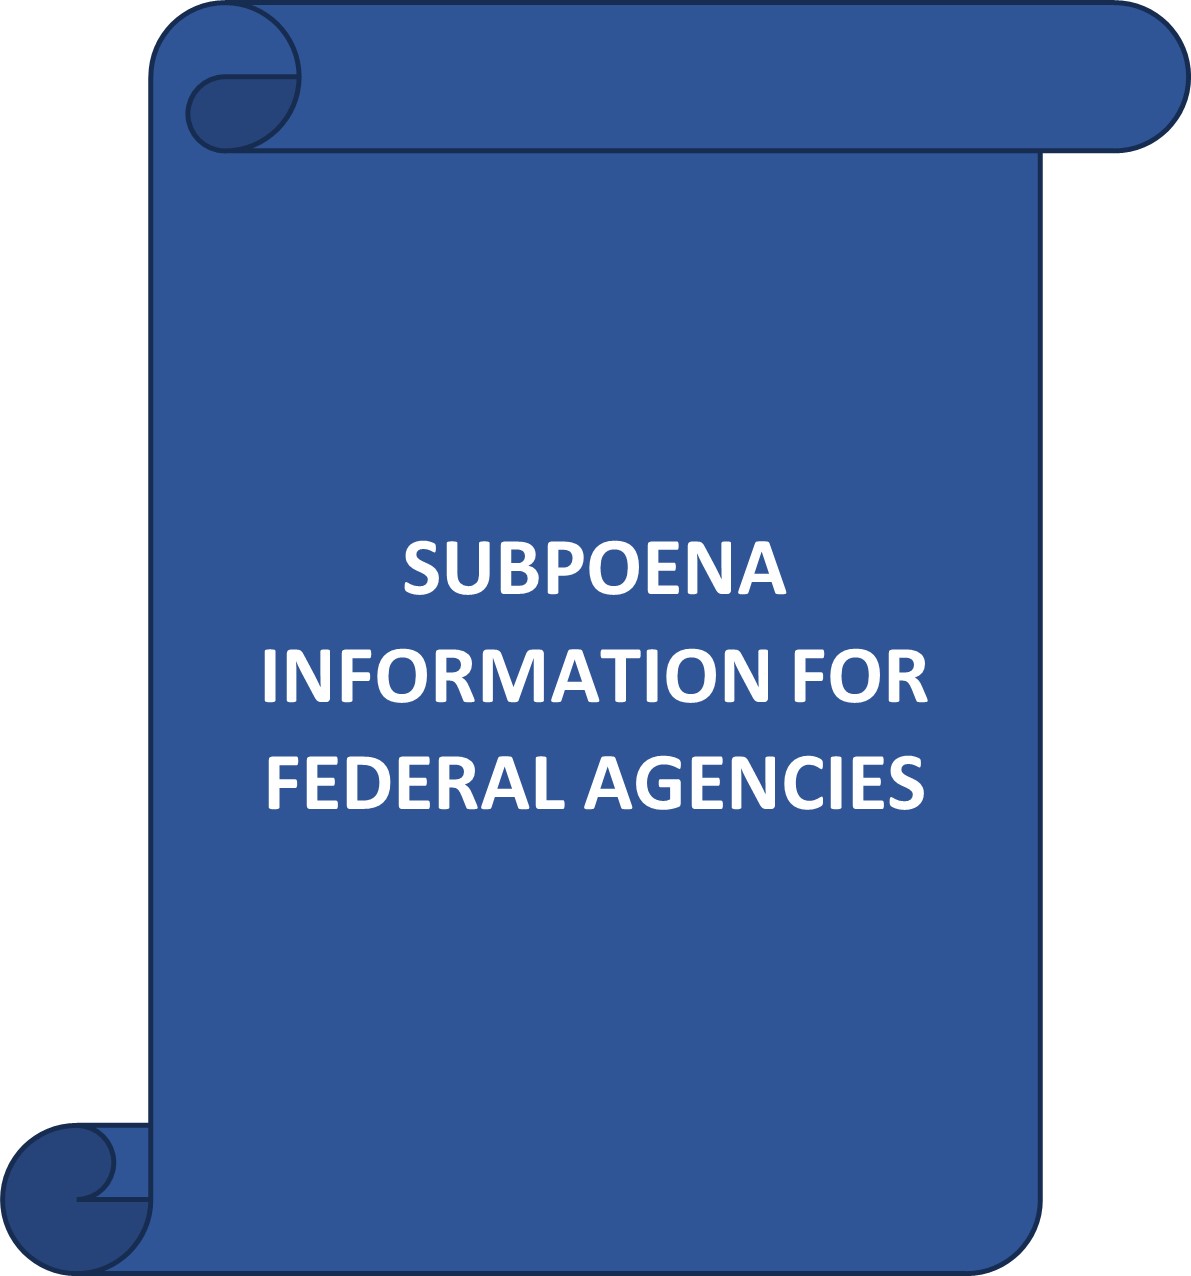 This graphic provides a link to requesting subpoenas for Federal employees and investigators